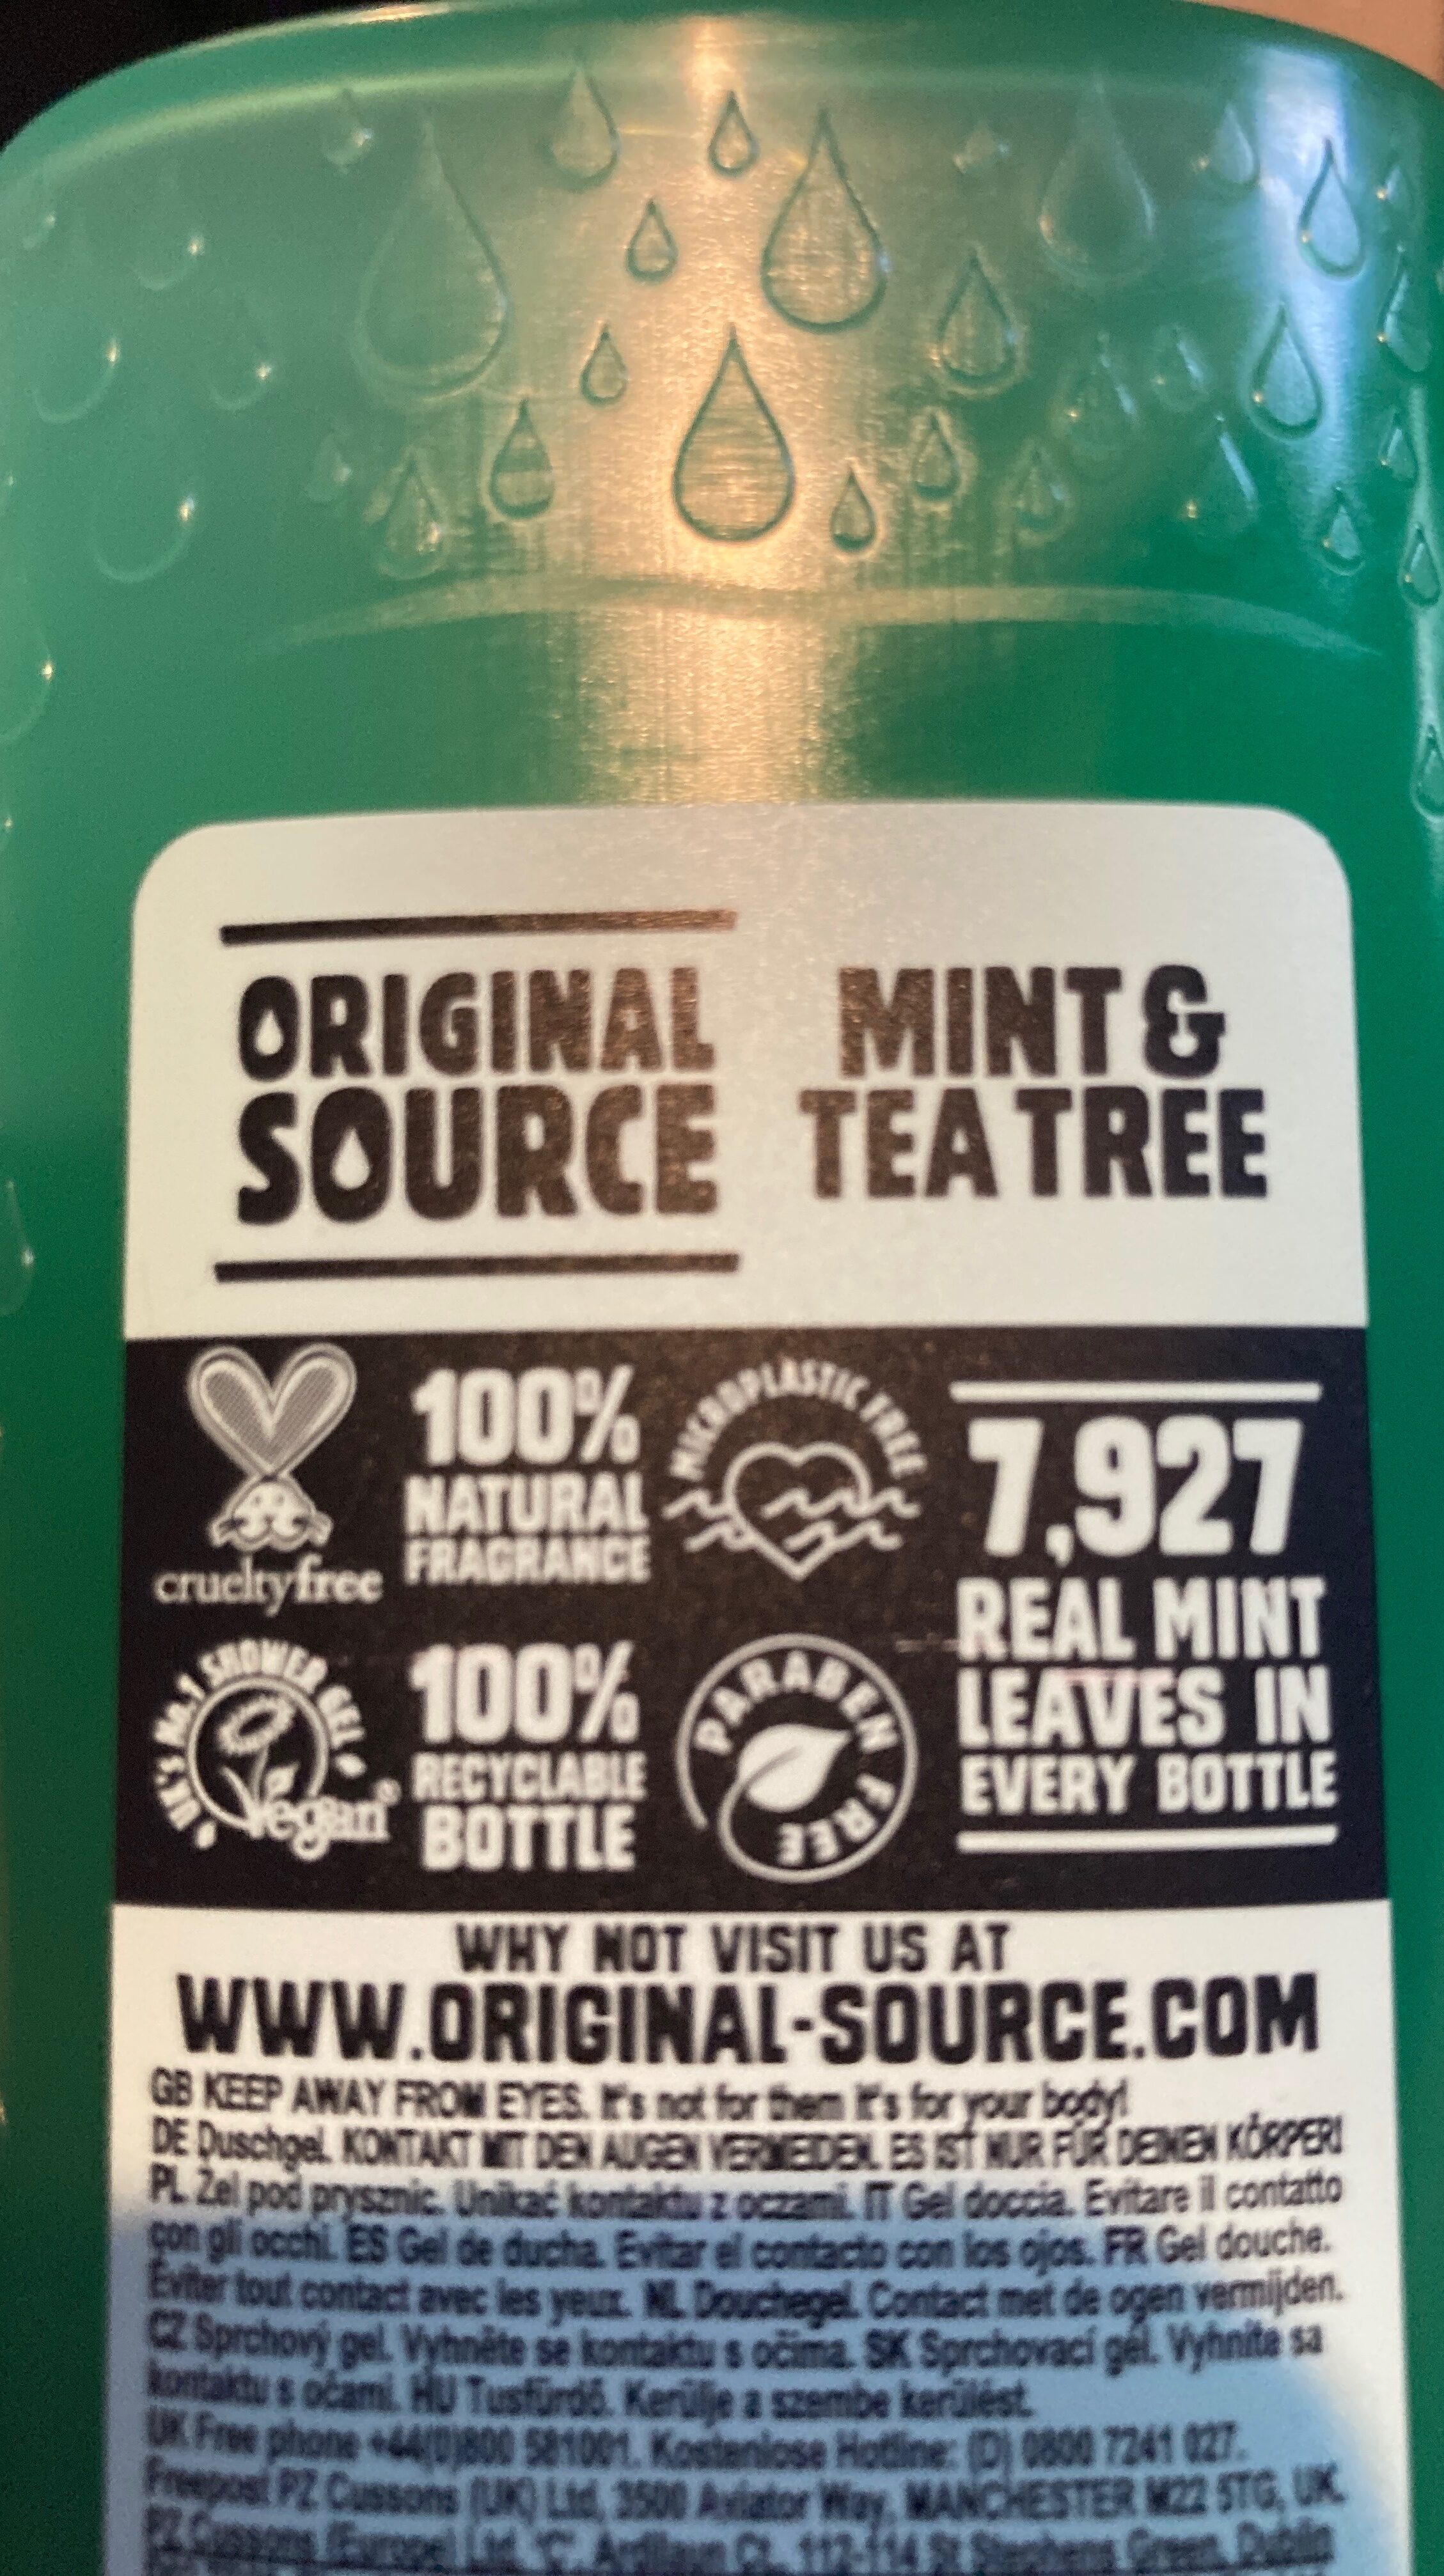 Tingly Mint & Tea Tree - Recycling instructions and/or packaging information